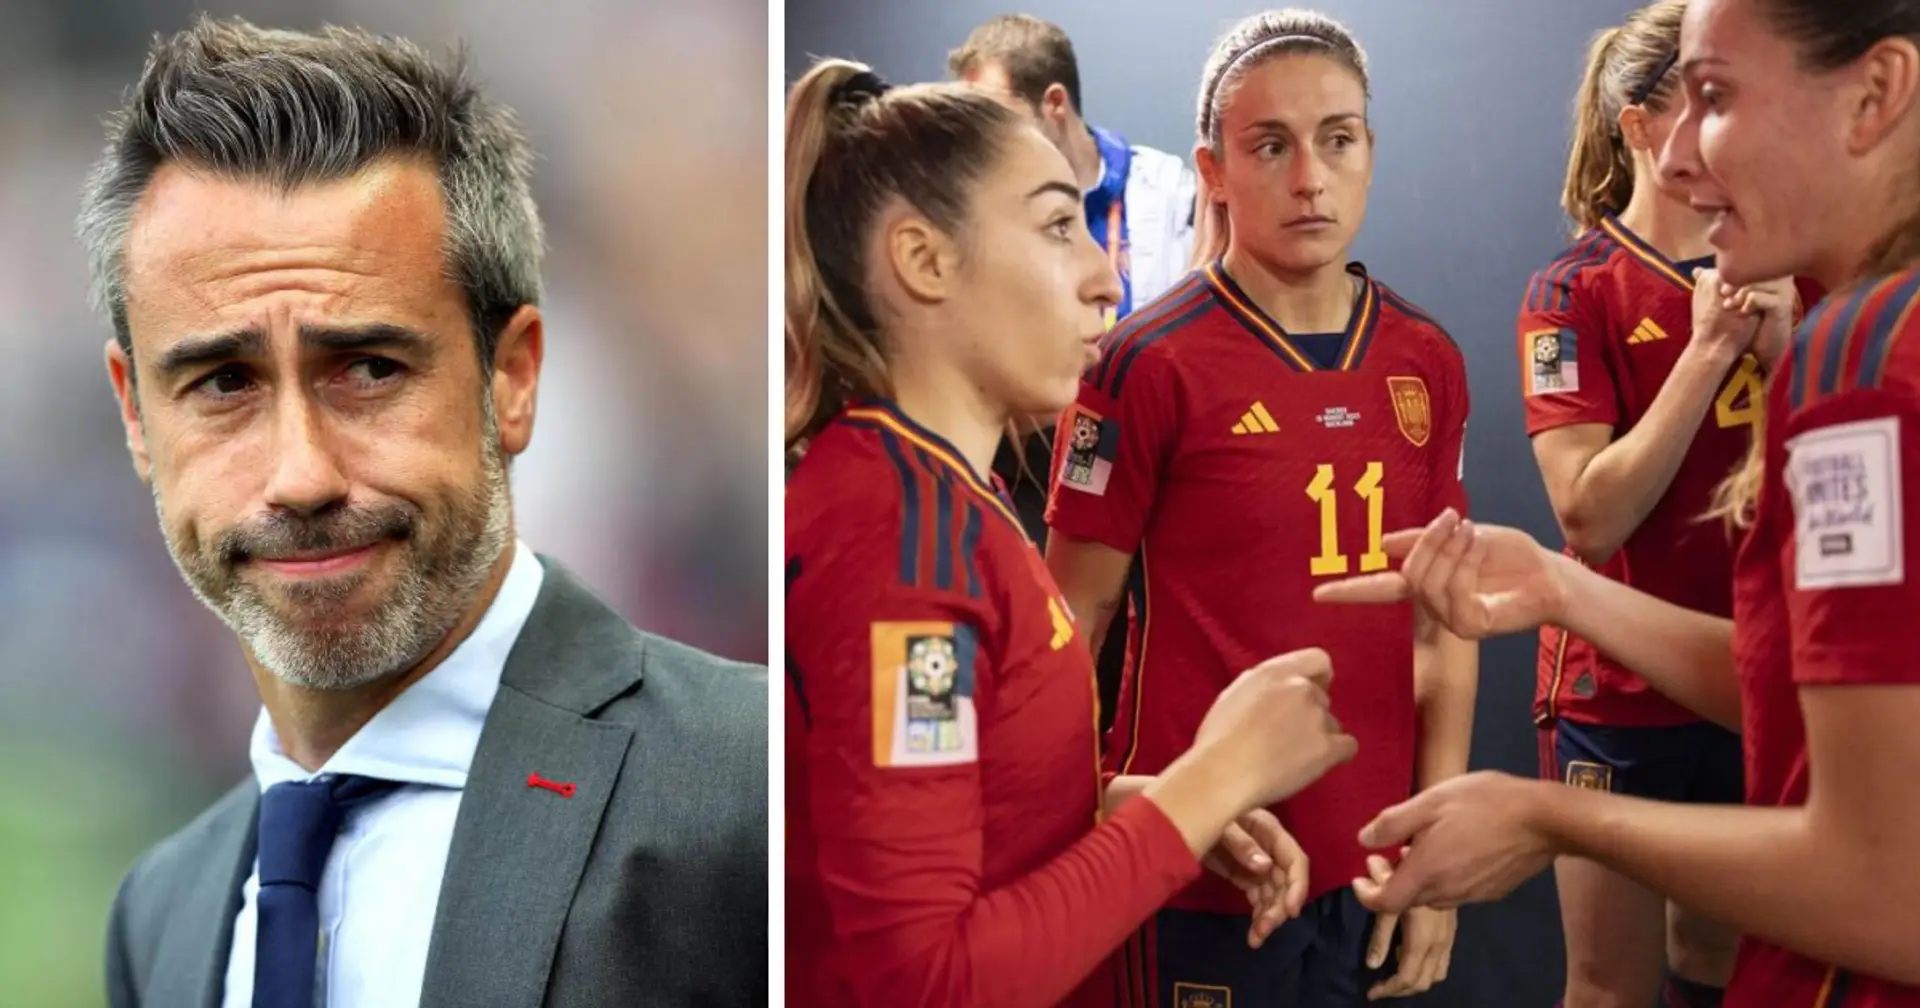 Spain Women's boss has some bizarre rules, as he forced stars to leave hotel rooms open